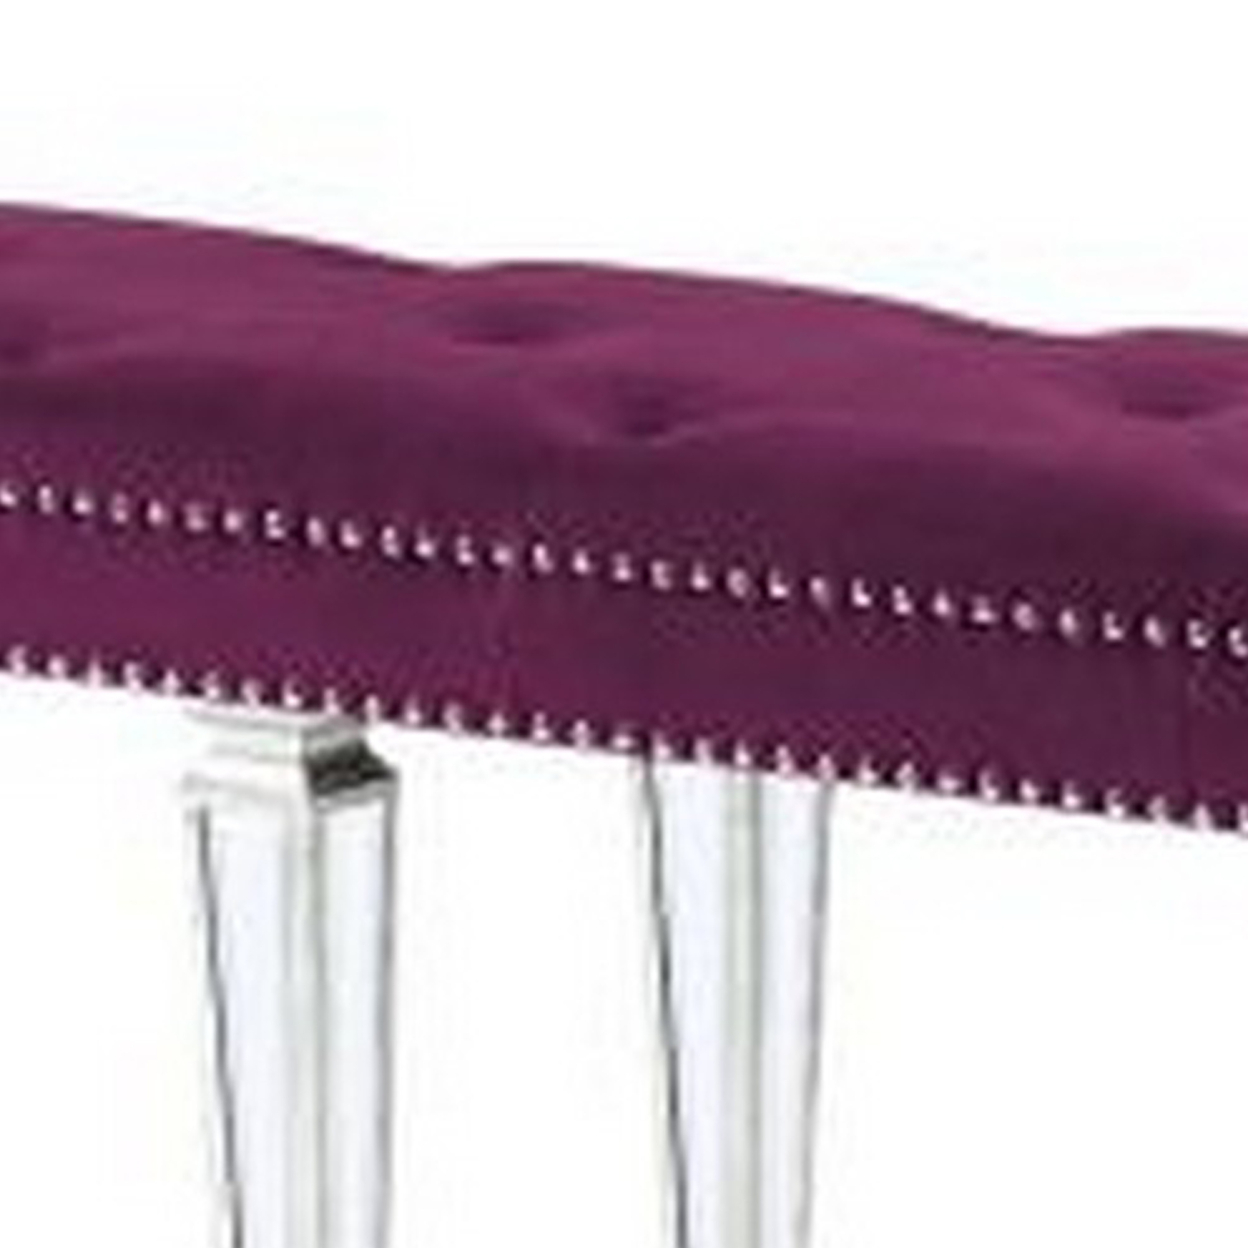 Accent Bench With Tufted Velvet Seat And Mirrored Legs, Purple- Saltoro Sherpi